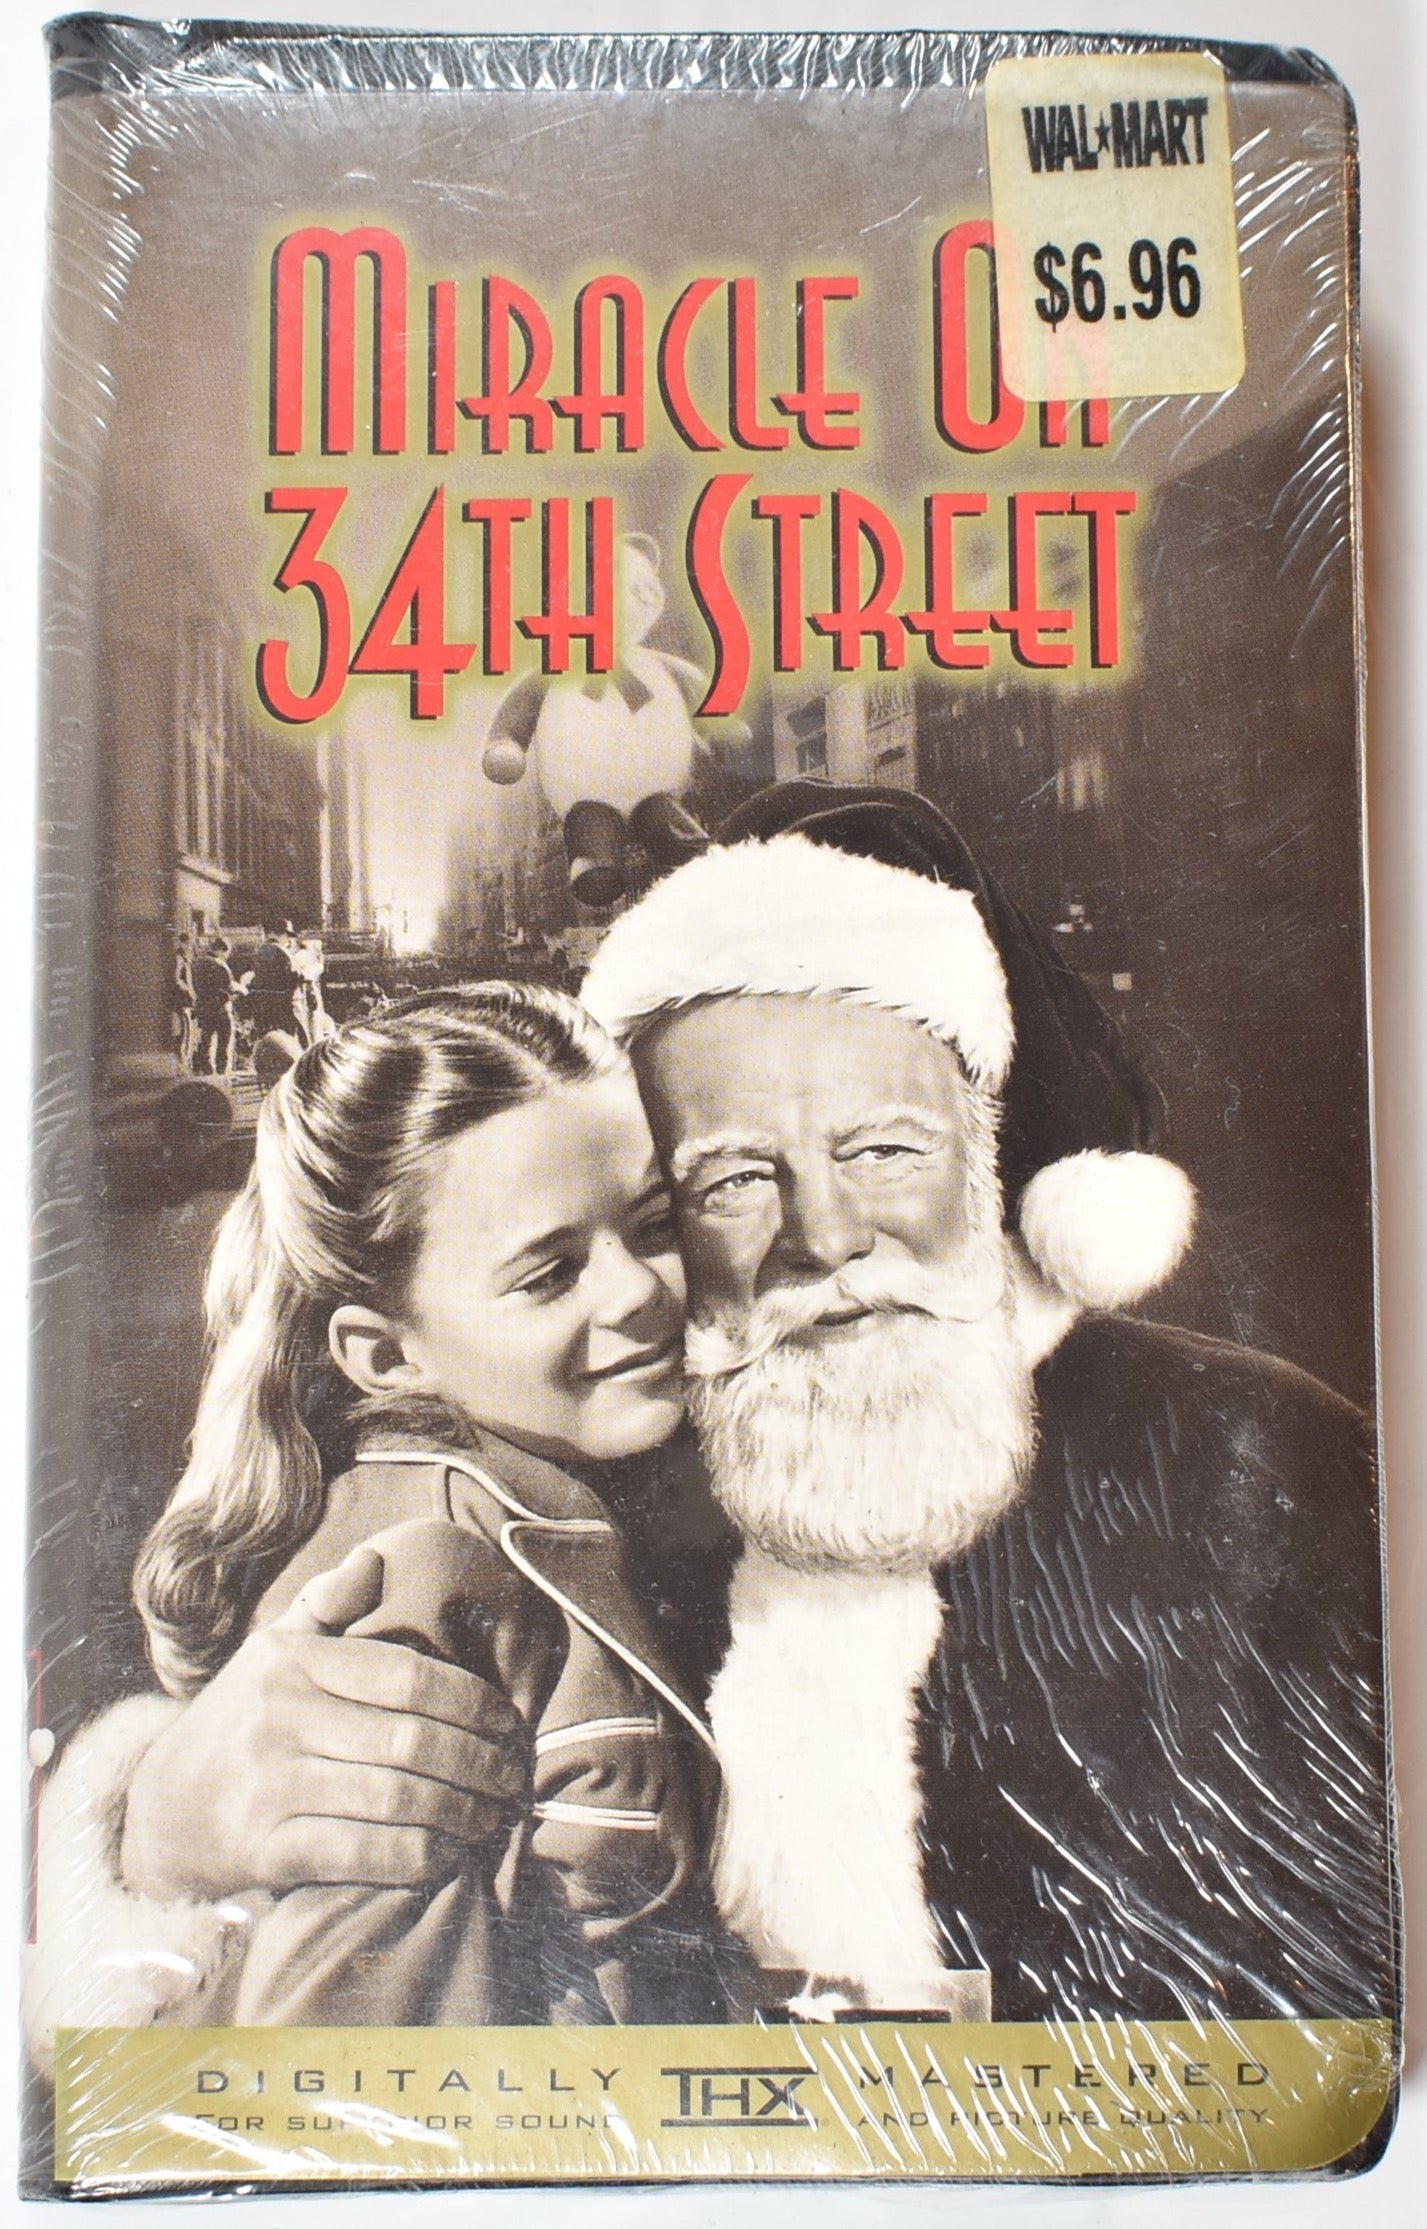 Miracle on 34th street Vhs tape movie NEW